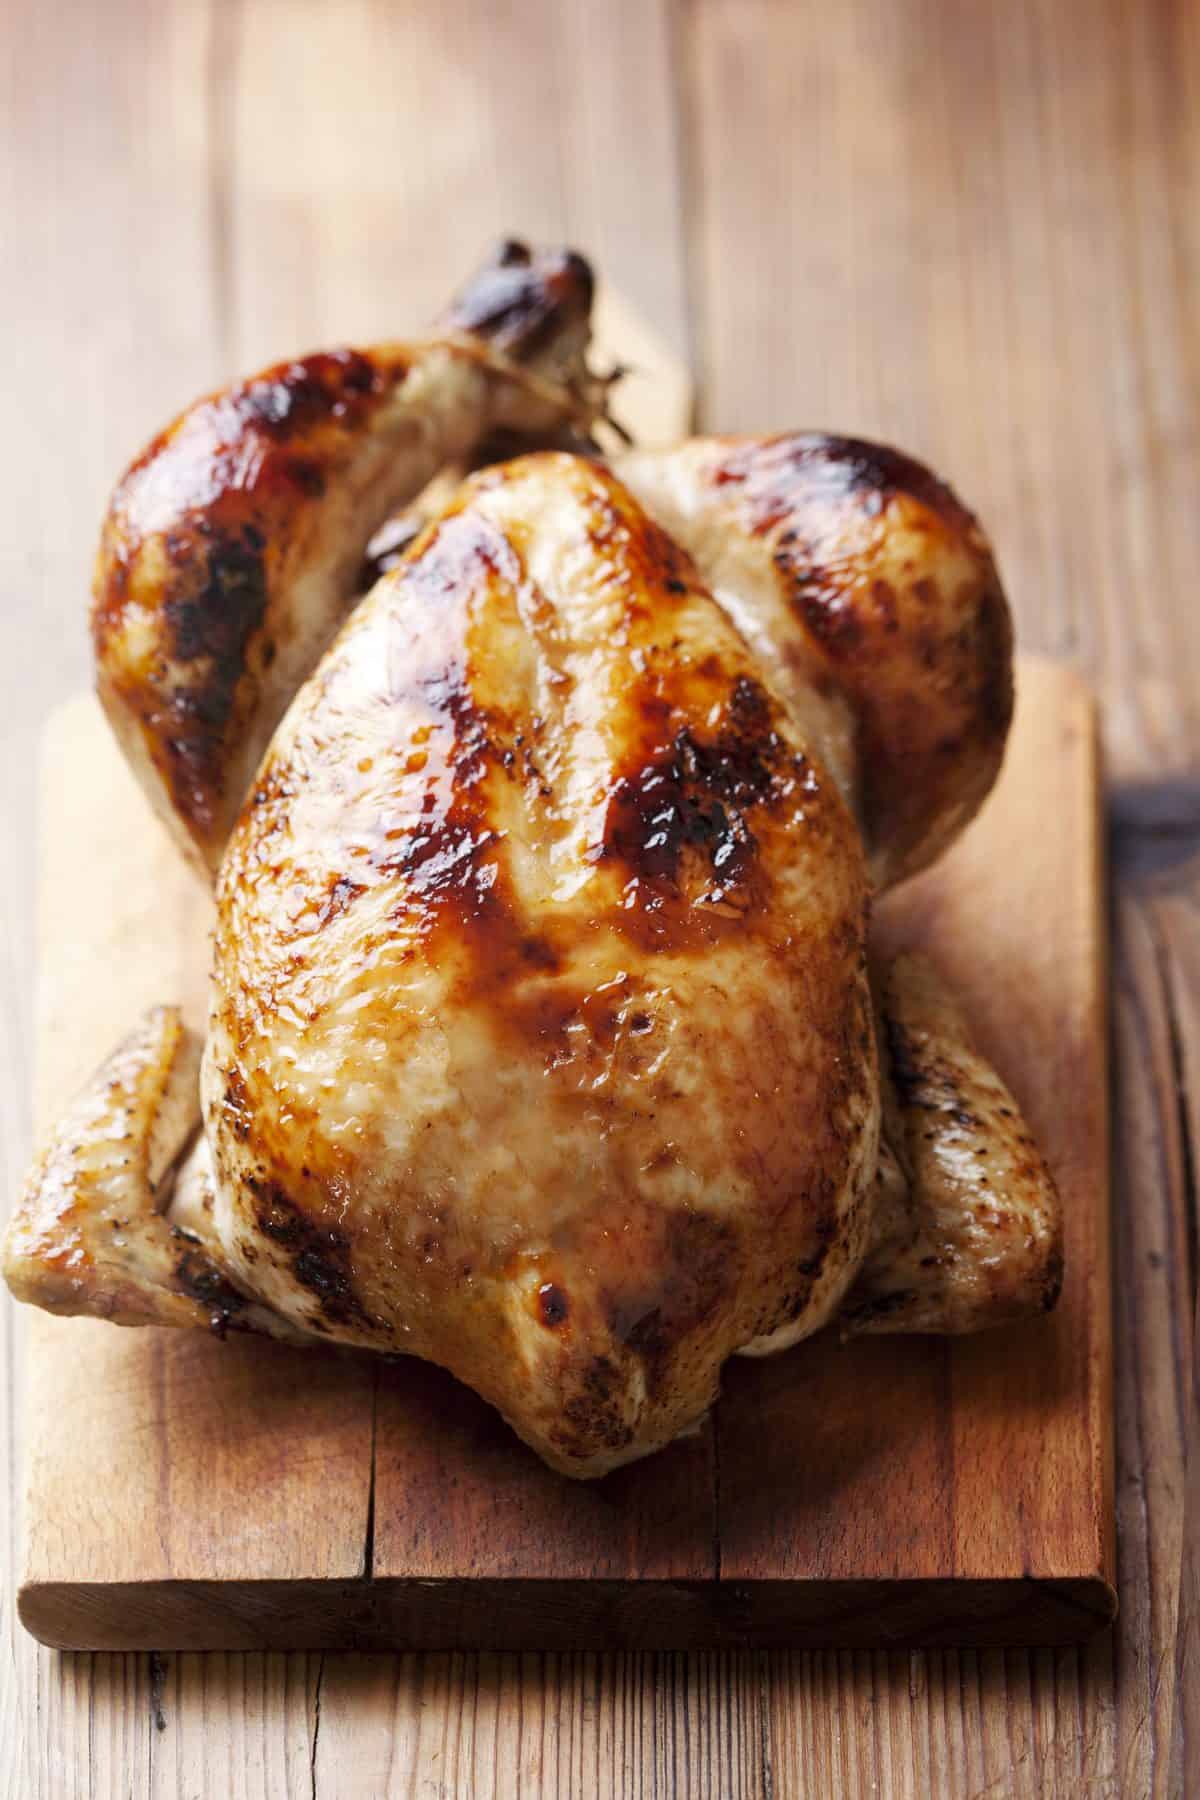 A rotisserie chicken sits on a wooden cutting board.